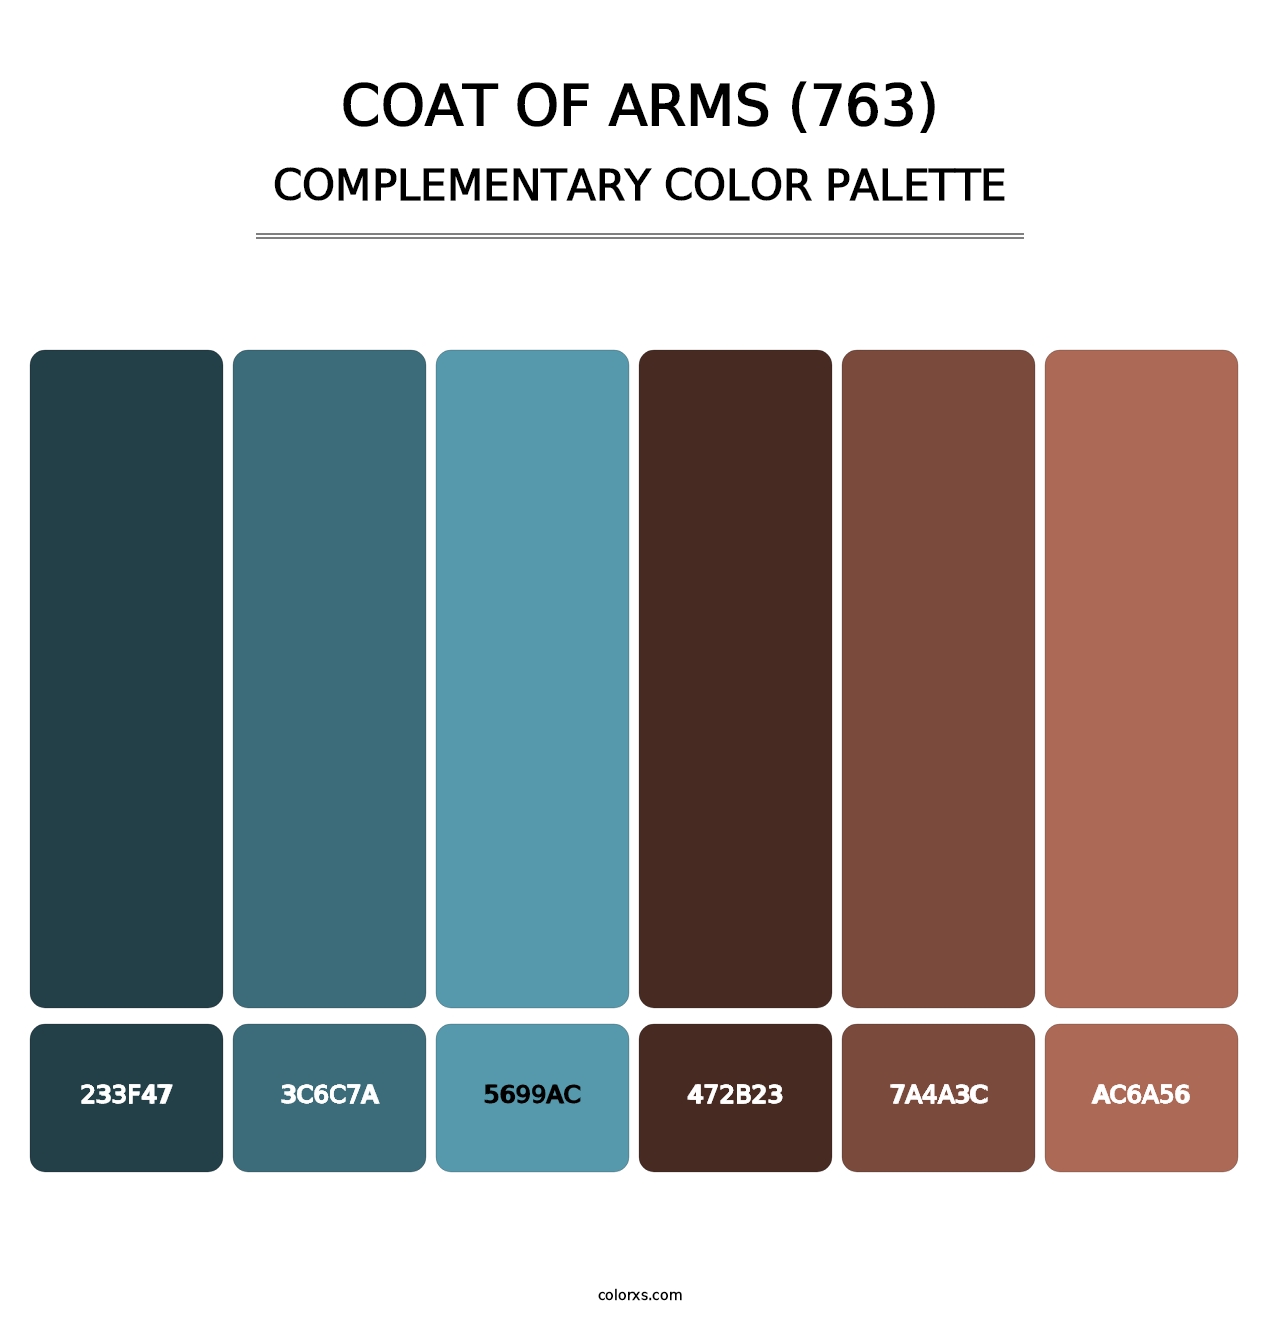 Coat of Arms (763) - Complementary Color Palette